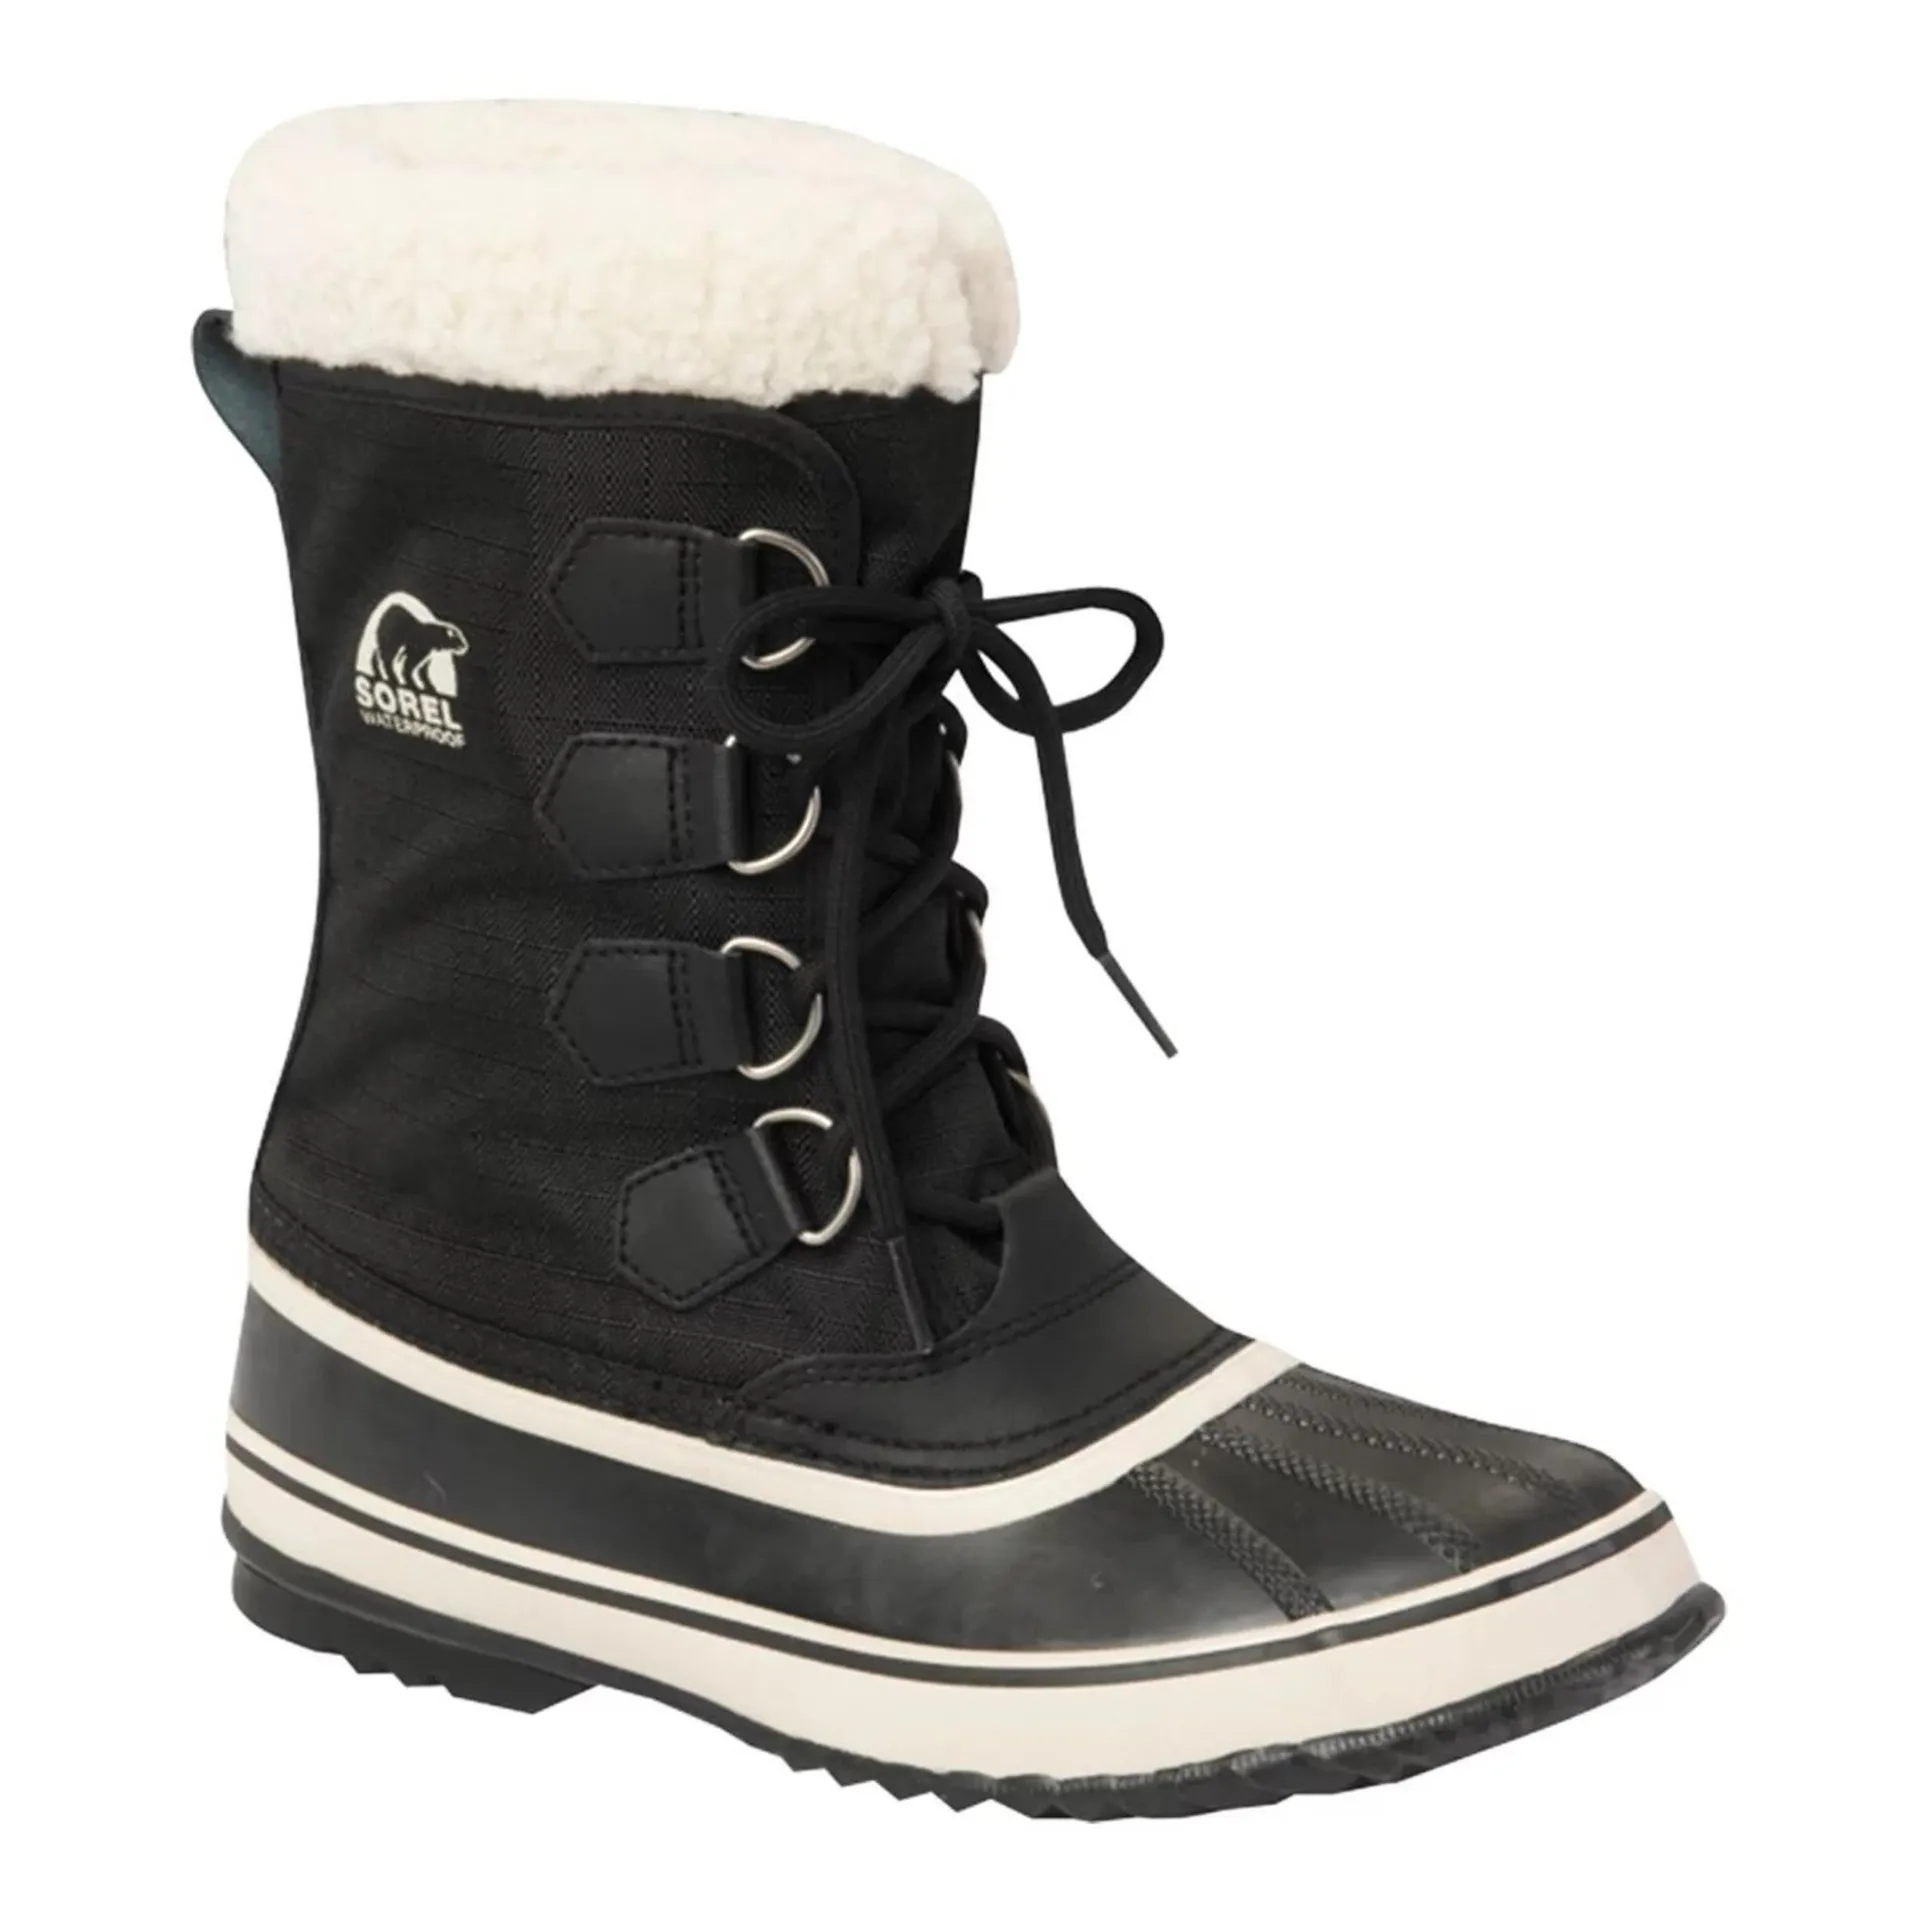 Sorel Women's Winter Carnival Lace-Up Waterproof Insulated Winter Boots